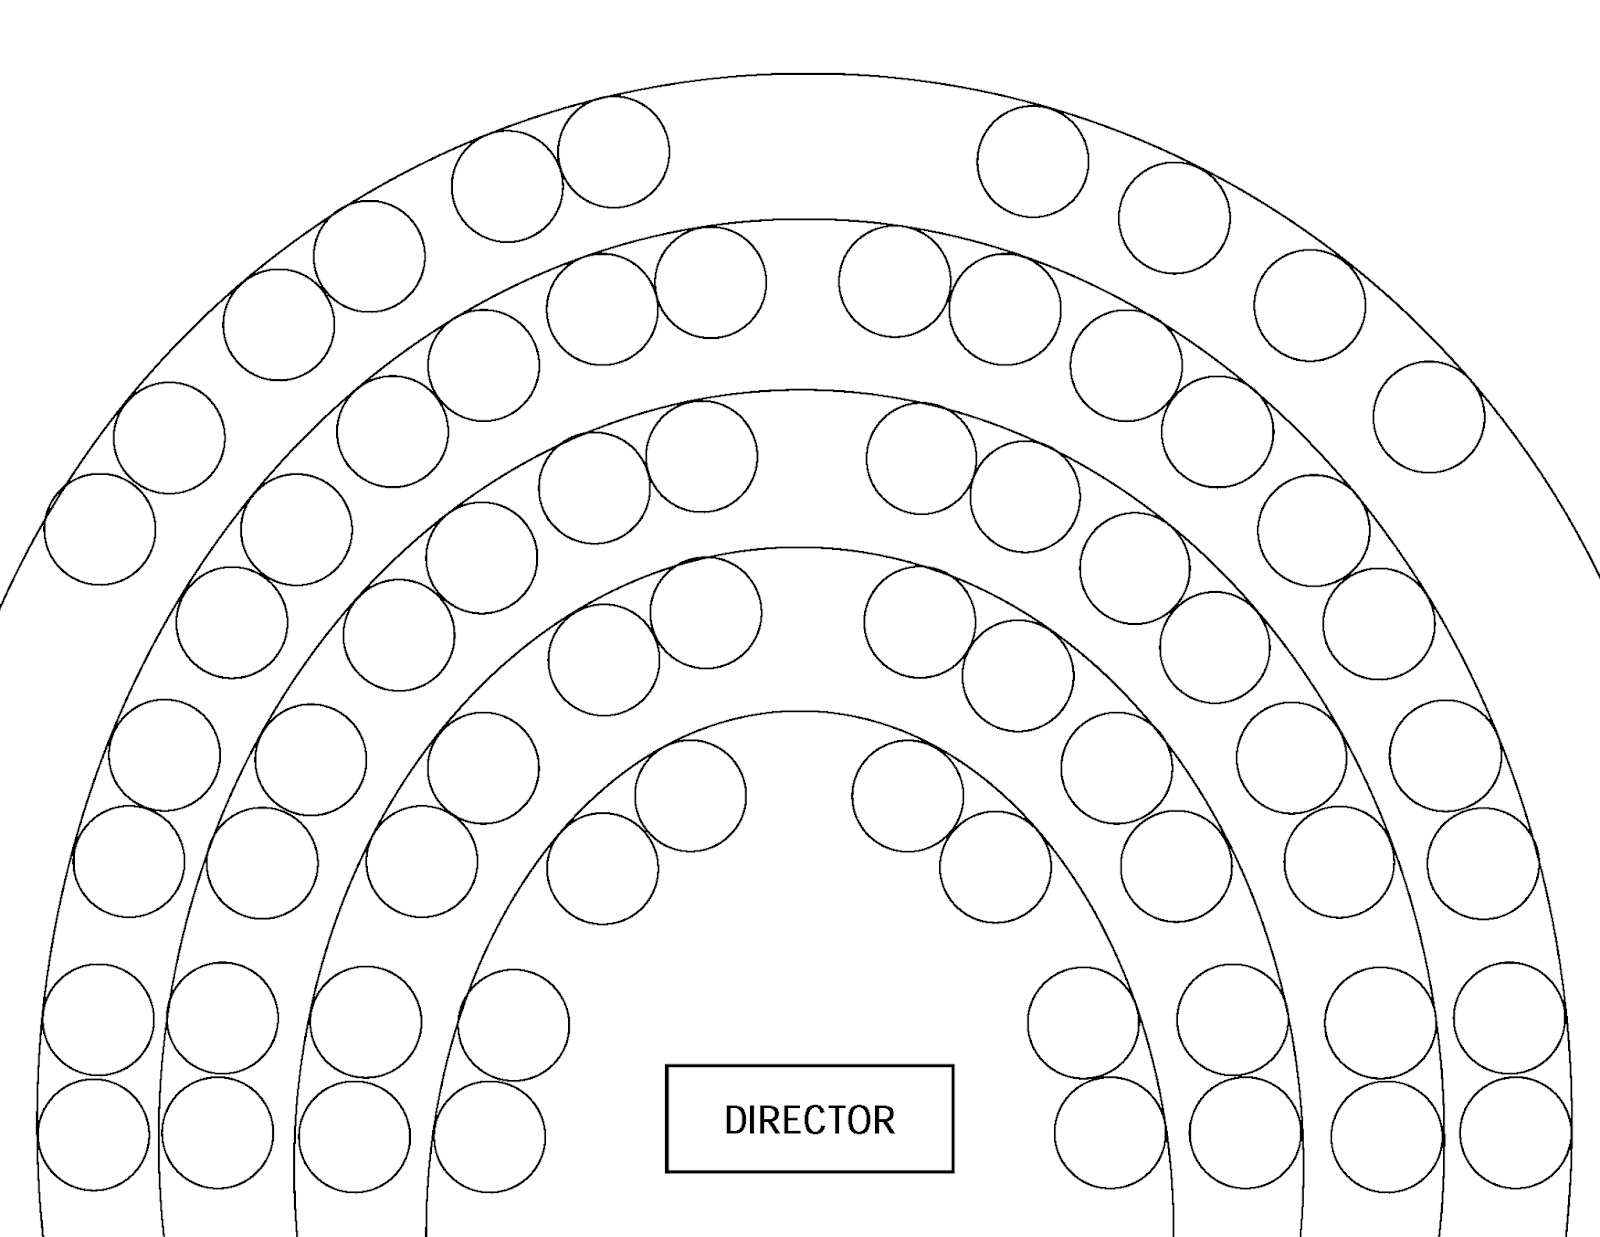 Orchestra Seats. Orchestra Seating Chart. Classroom Seating Arrangement. Orchestra (Auditorium). Fun plan